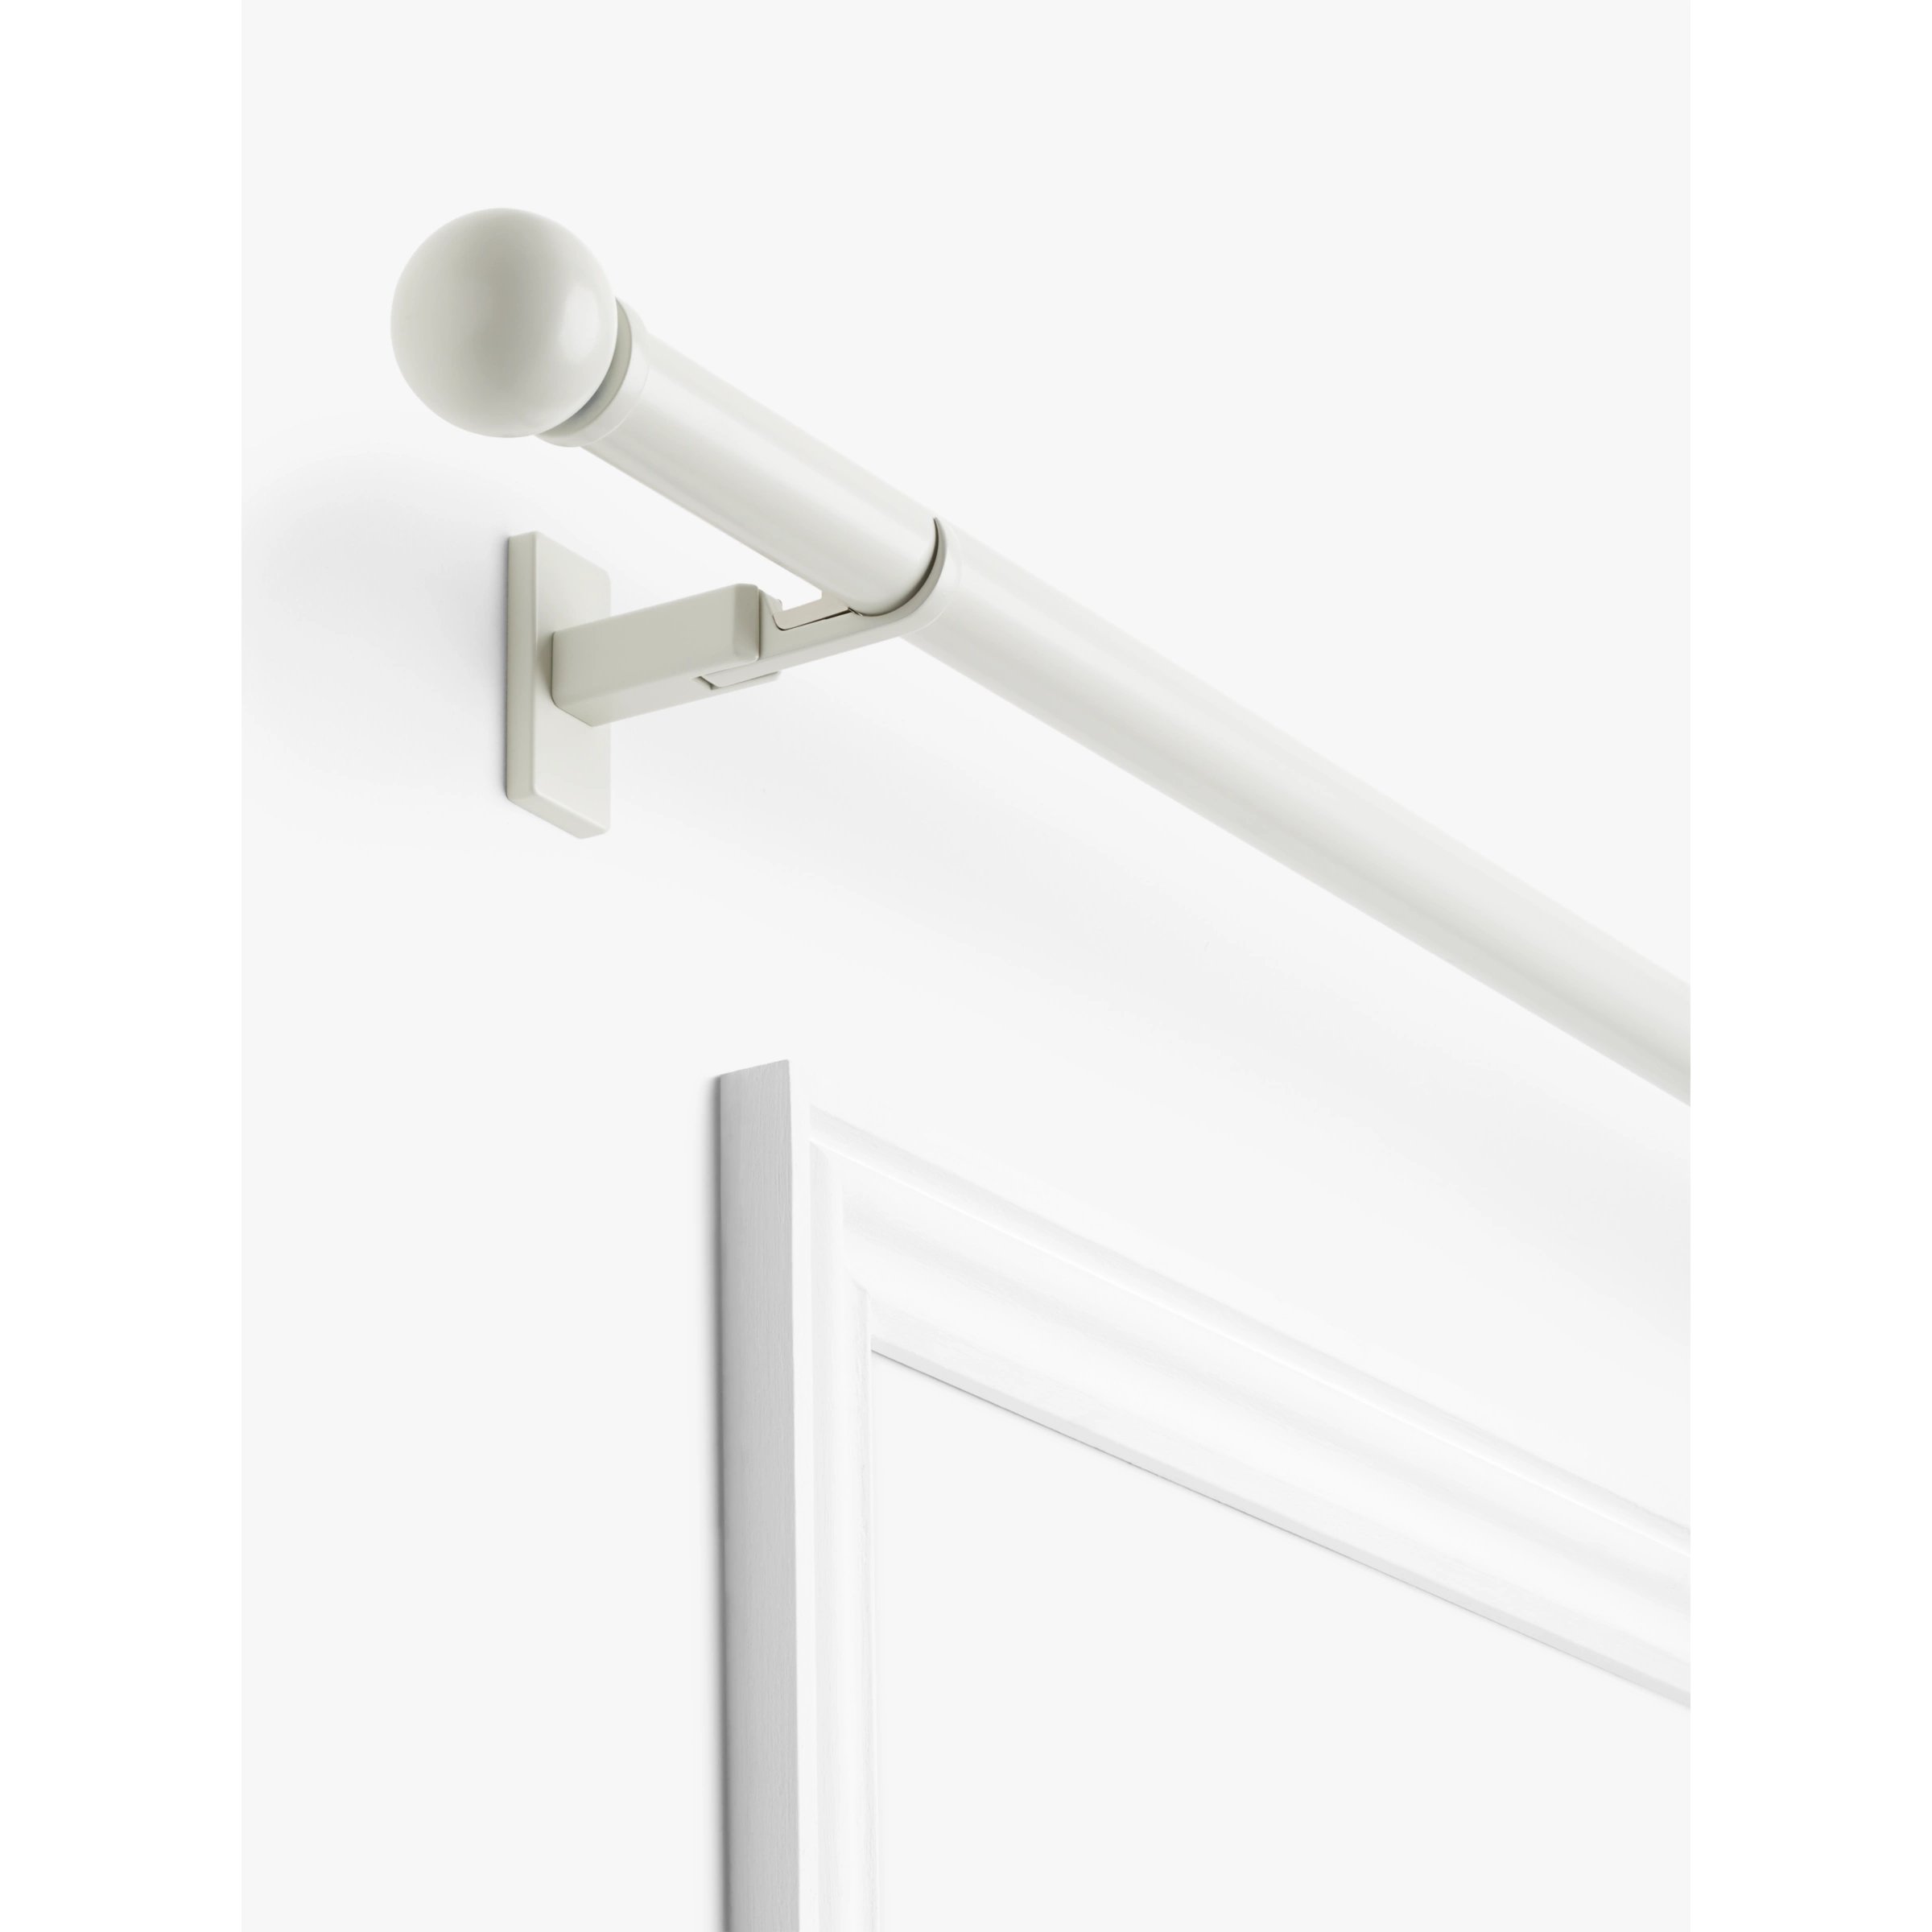 John Lewis Made to Measure Revolution Eyelet Curtain Pole with Ball Finials, Wall / Ceiling Fix, Dia.30mm